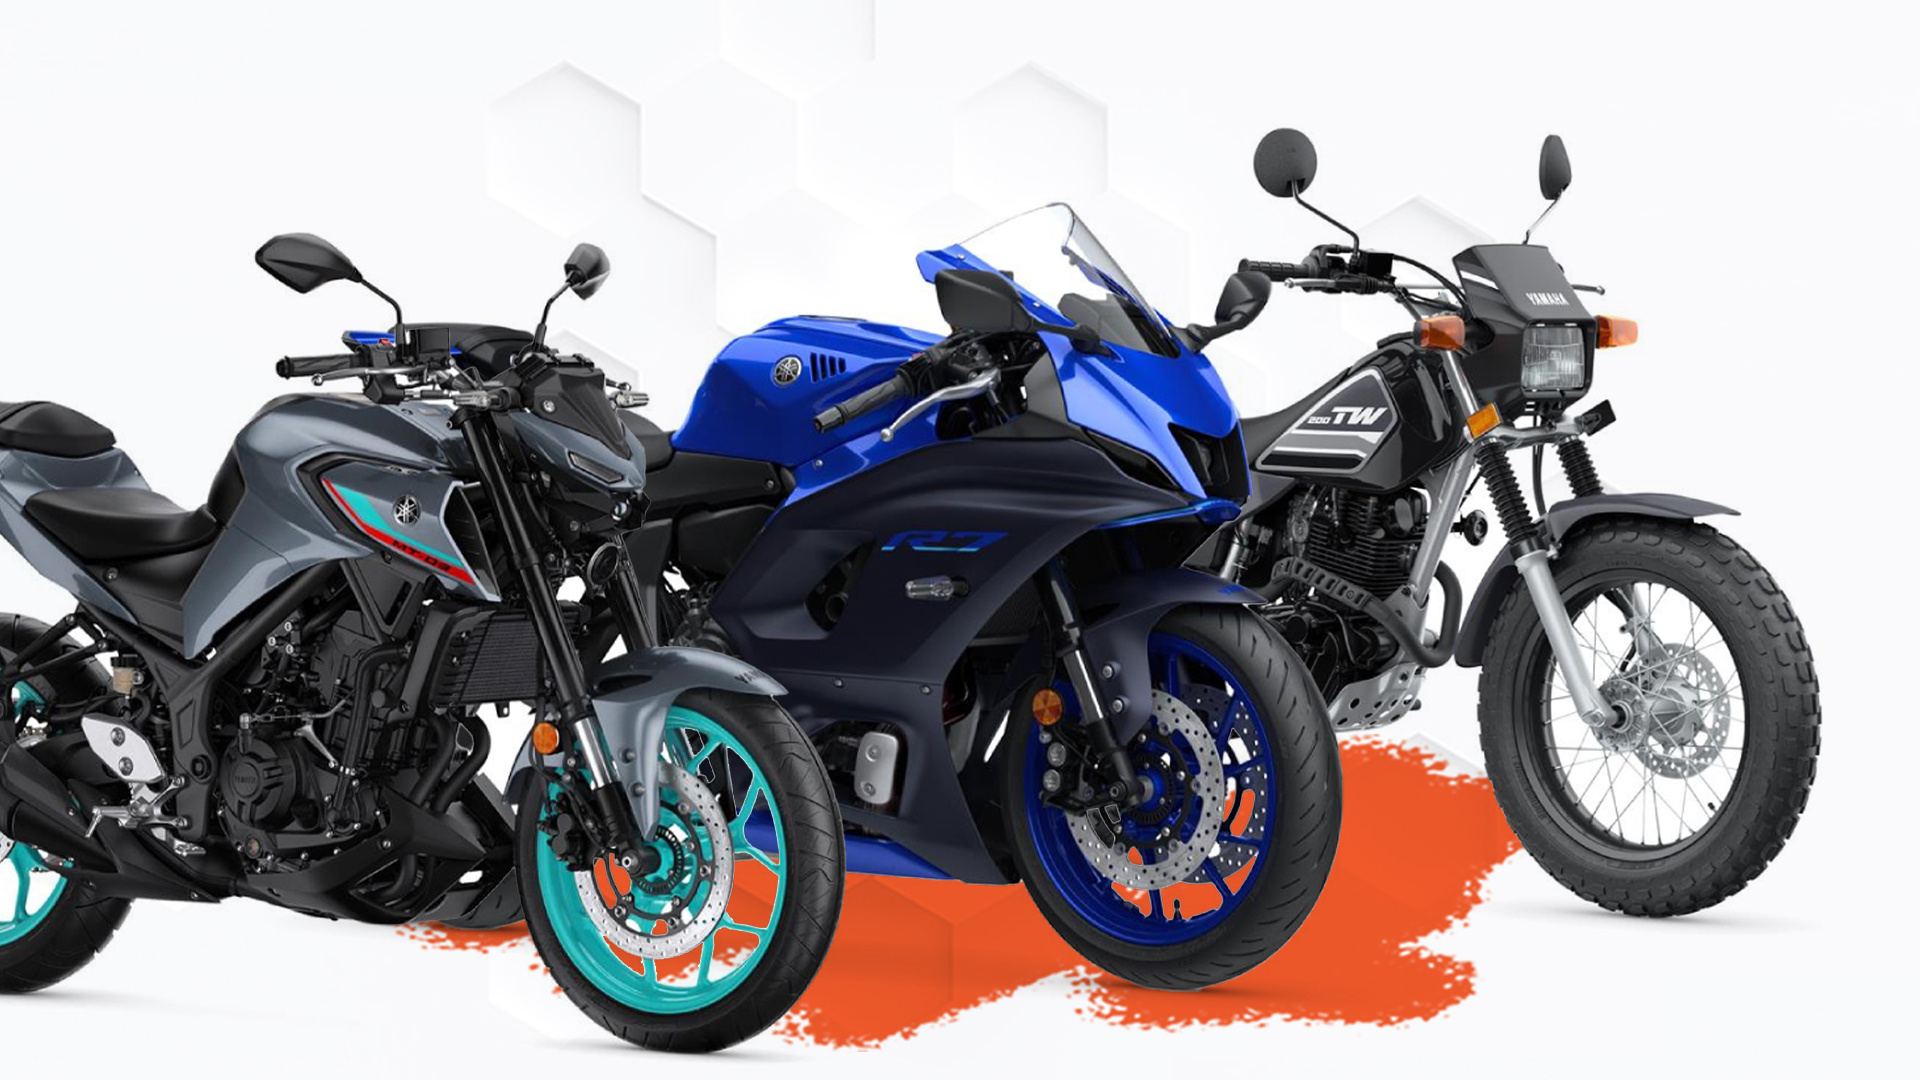 The 2023 Yamaha Motorcycle Lineup + Our Take on Each Model